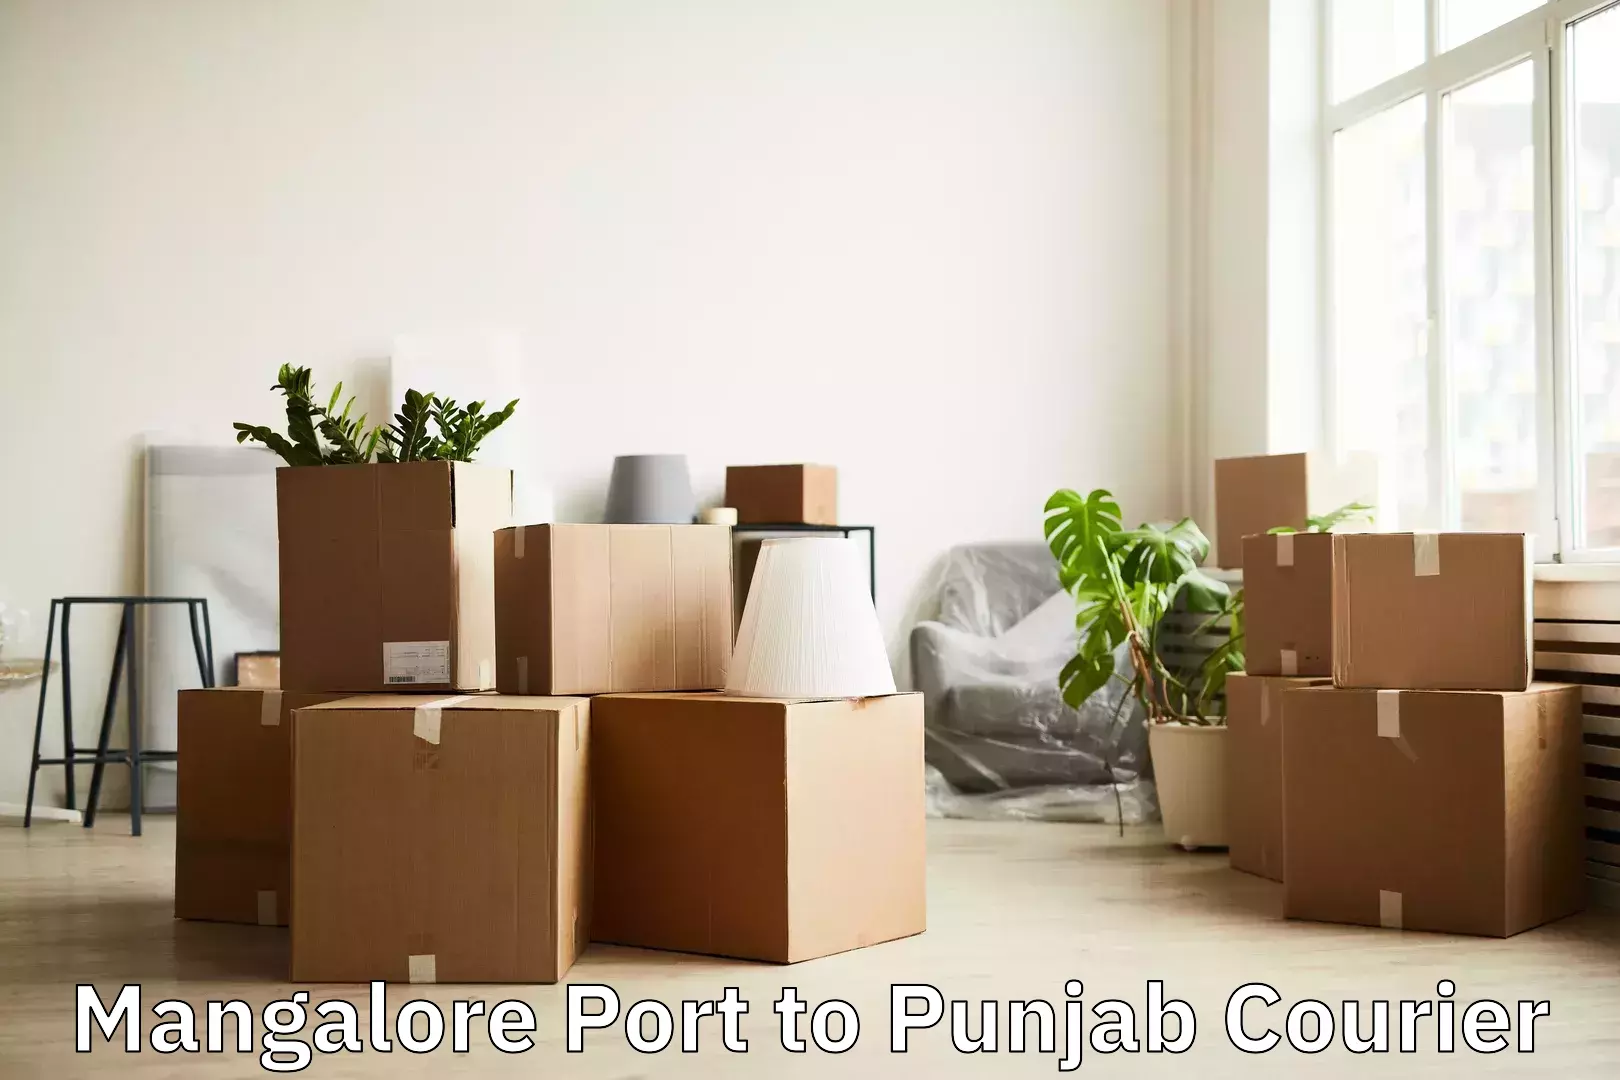 Luggage delivery providers Mangalore Port to Ludhiana